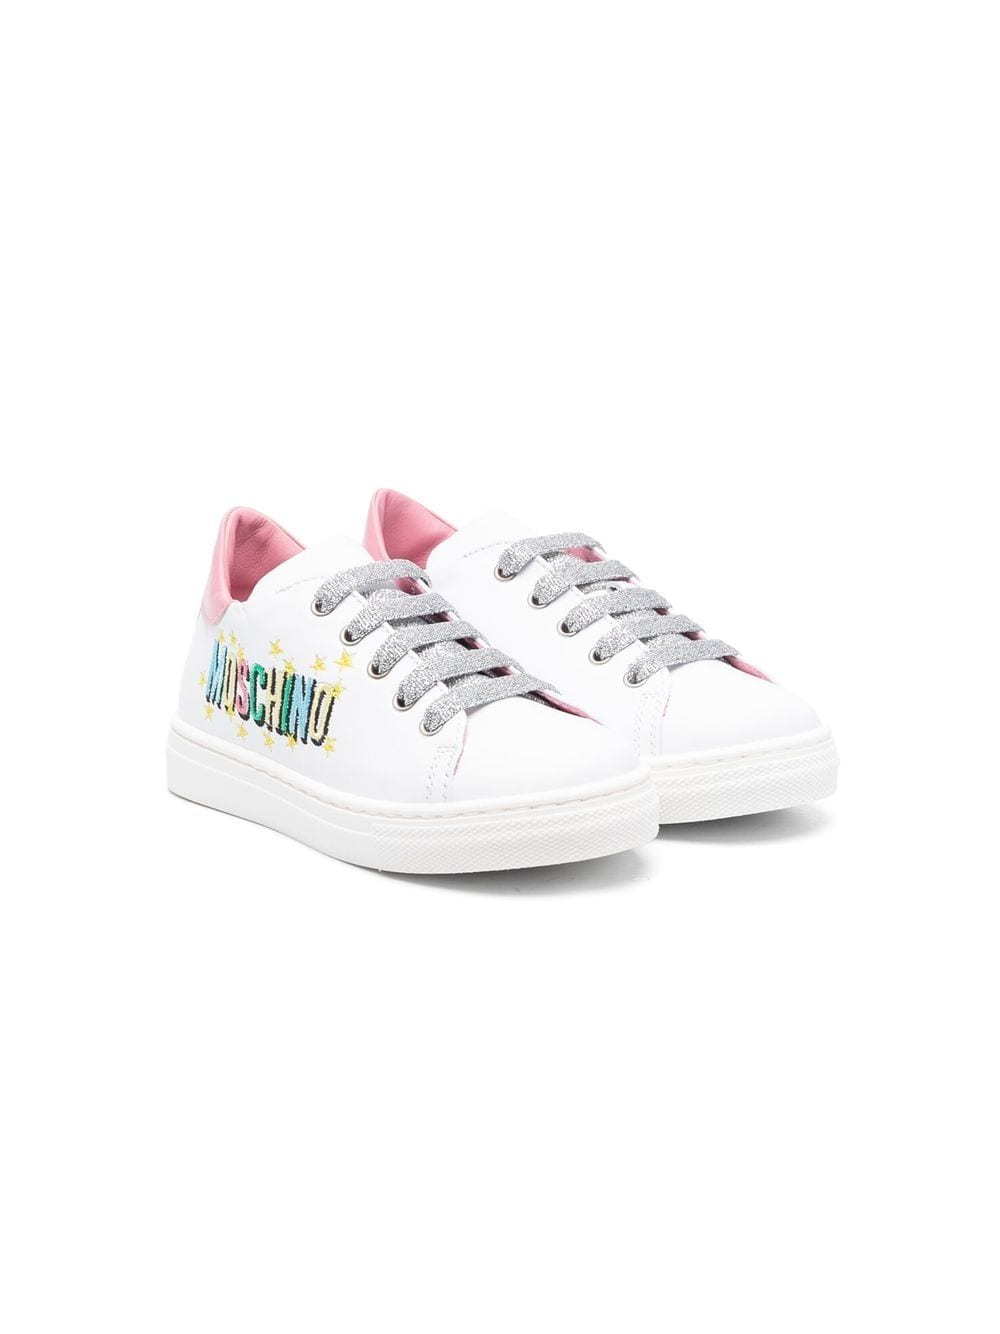 Moschino Kids' Embroidered Logo Leather Sneakers In White